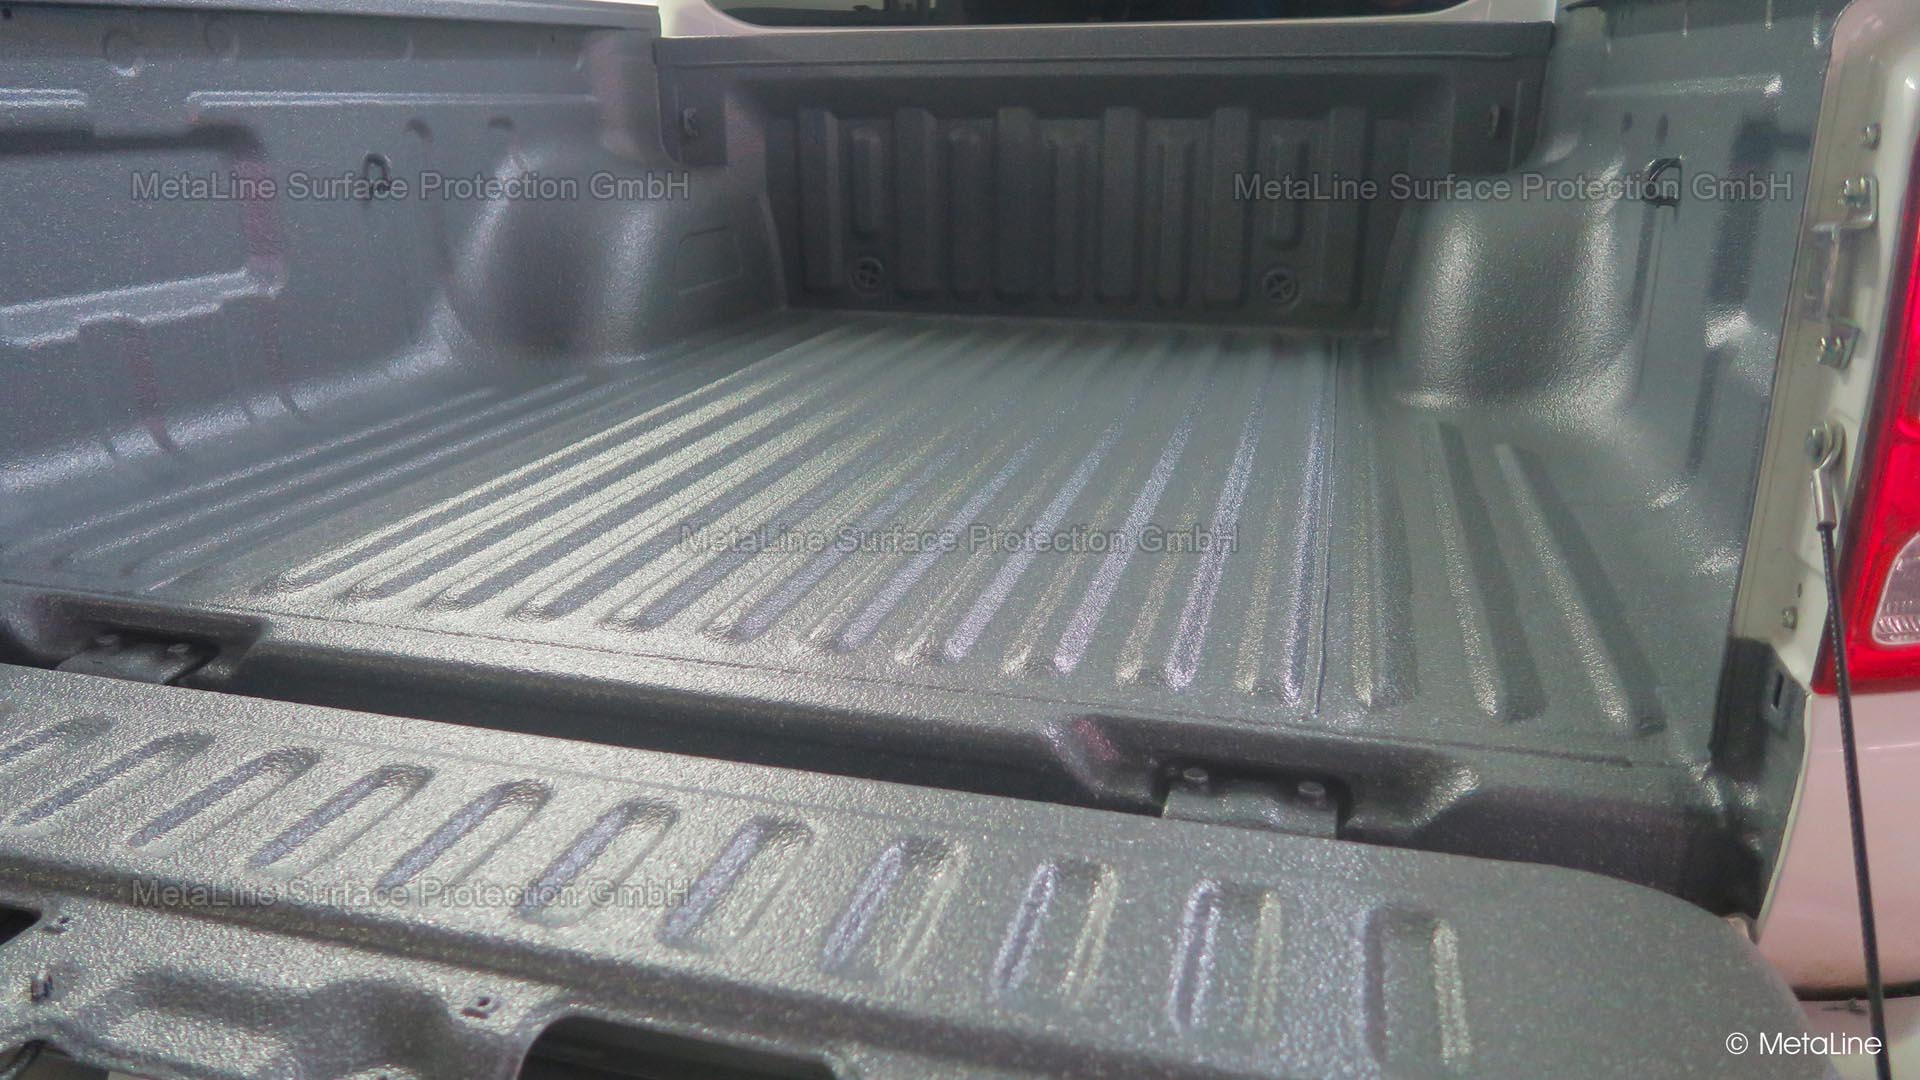 <!-- START: ConditionalContent --><!-- END: ConditionalContent -->   <!-- START: ConditionalContent --> Cargo car; Pick-up; Loading area; Lining; Coating; Seamless; Spray; PU; Decorative; Resilient; Food safe; Load securing; Anti-slip; Waterproof; Elastic; Cleanable; Platform; Decorative; Durable <!-- END: ConditionalContent -->   <!-- START: ConditionalContent --><!-- END: ConditionalContent -->   <!-- START: ConditionalContent --><!-- END: ConditionalContent -->